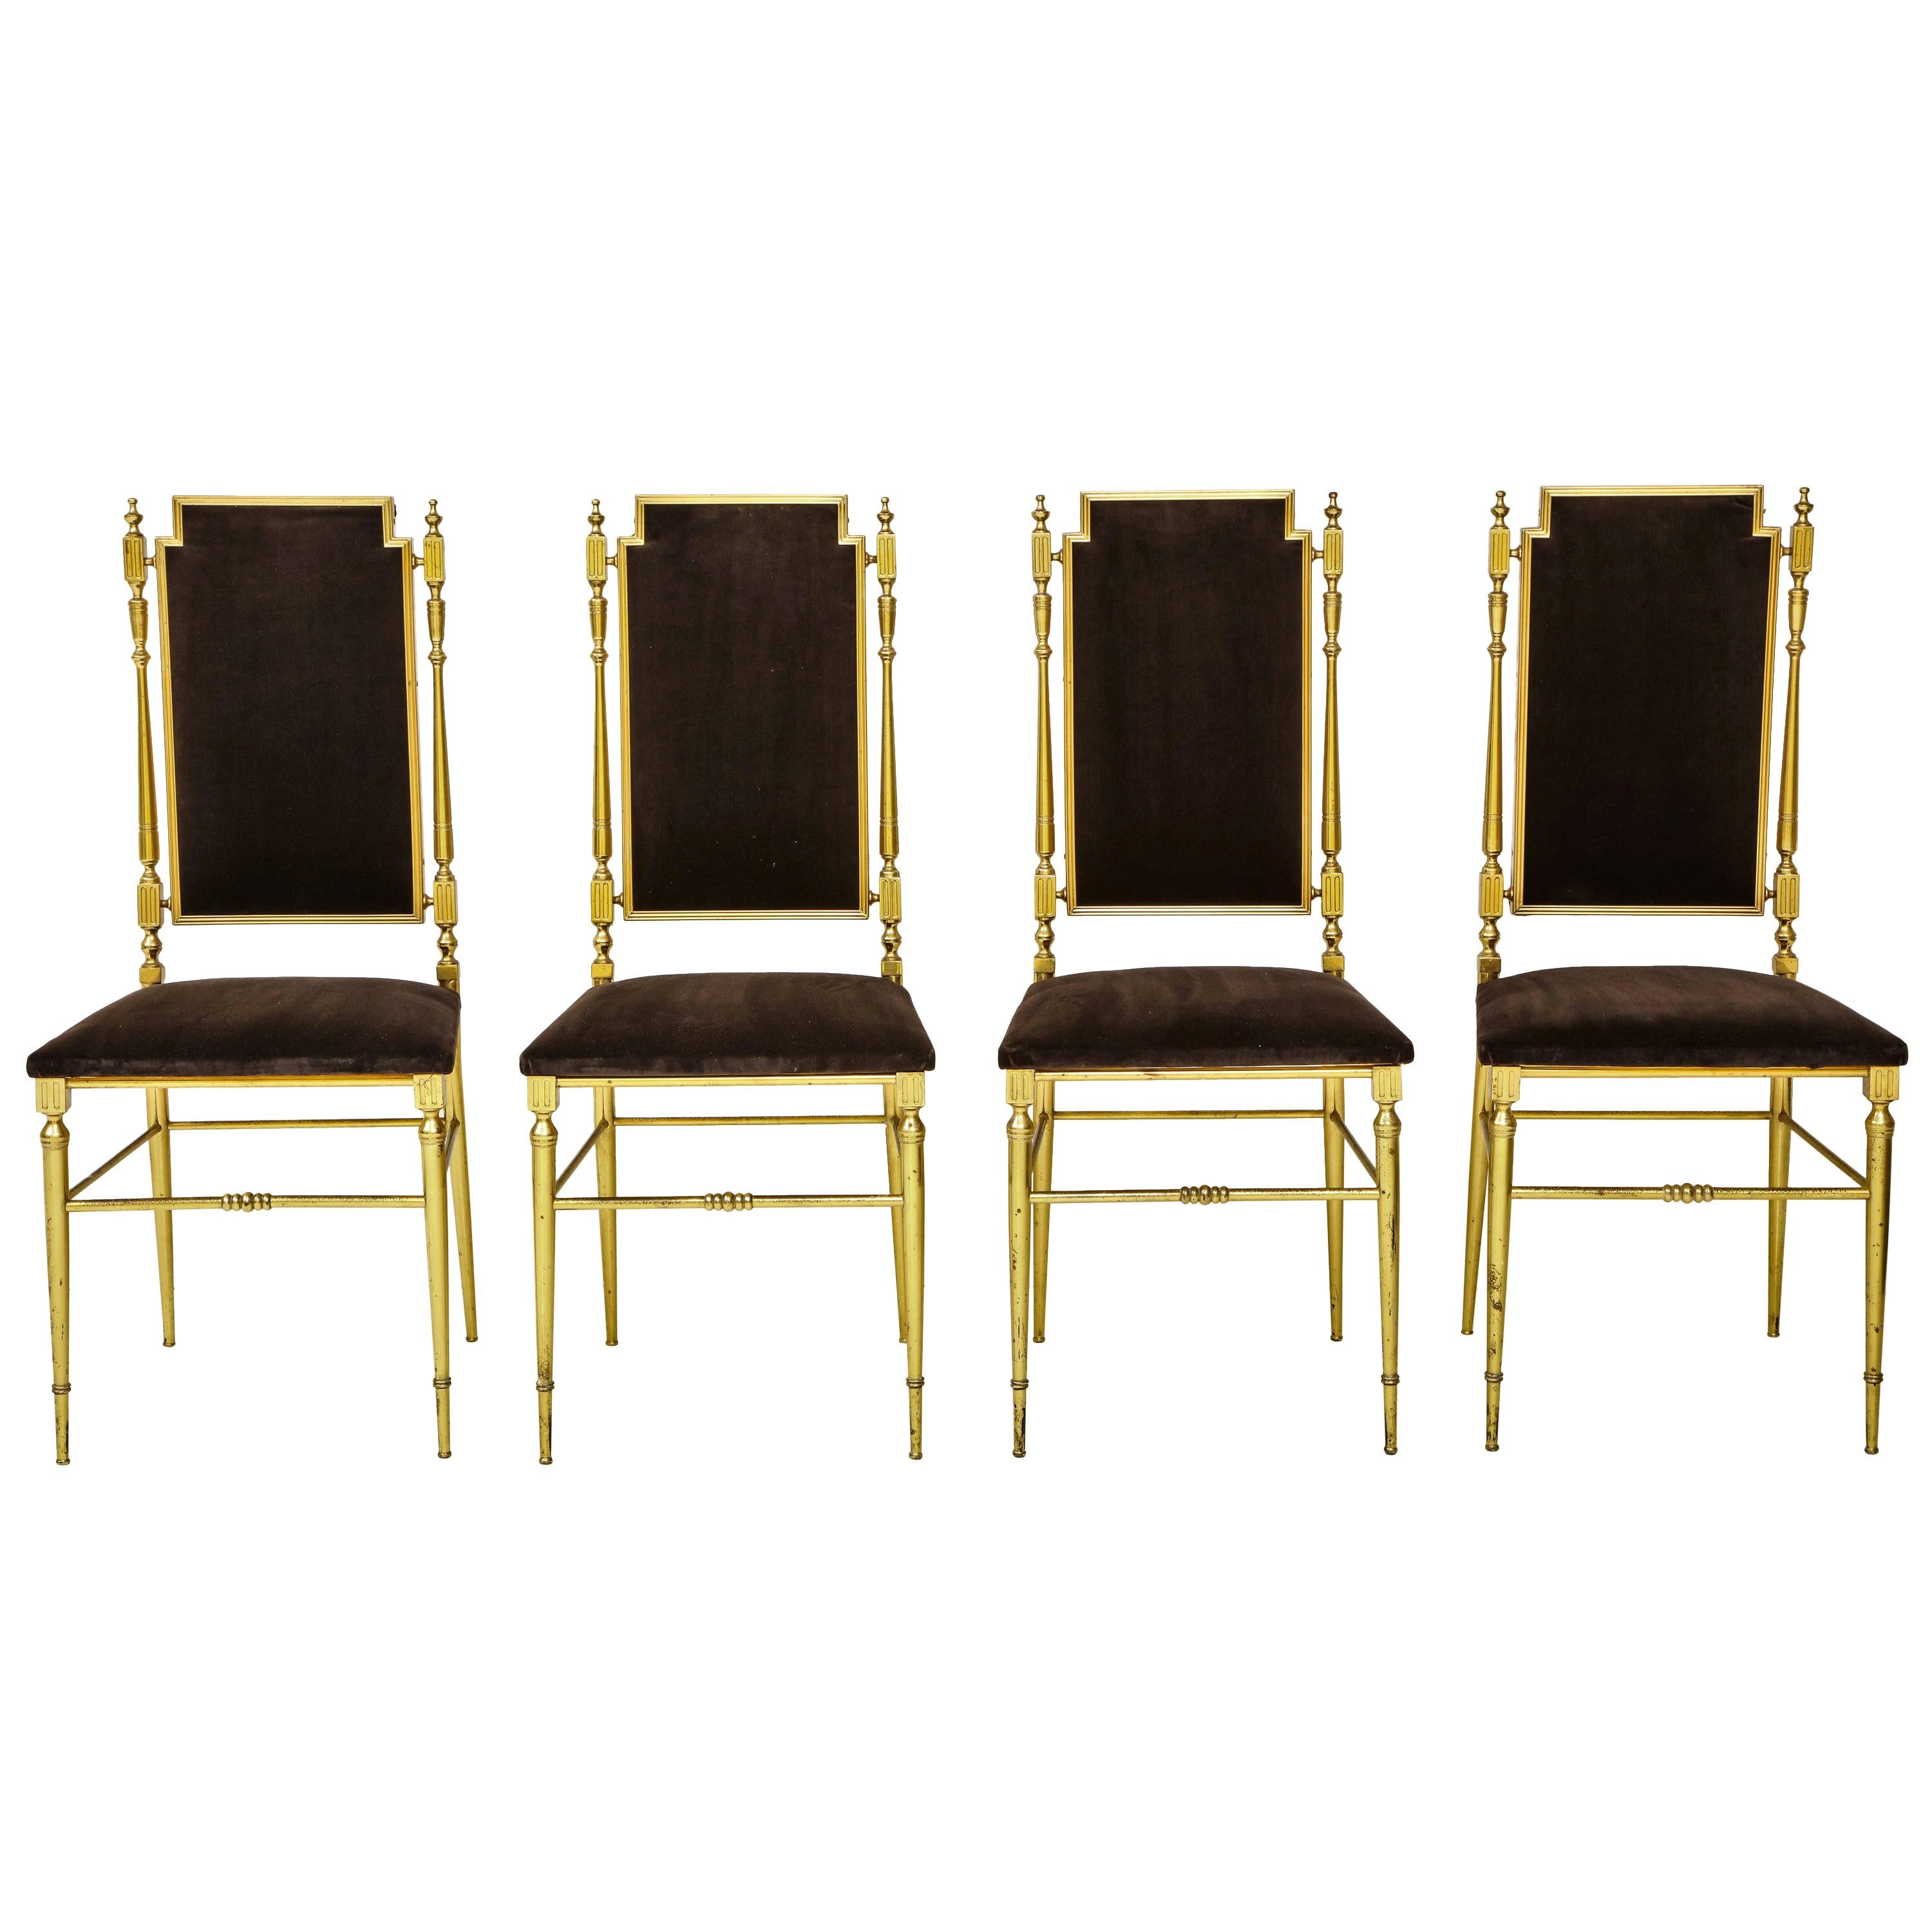 Suite of Four Solid Brass Chiavari Chairs, Italy, 1970s